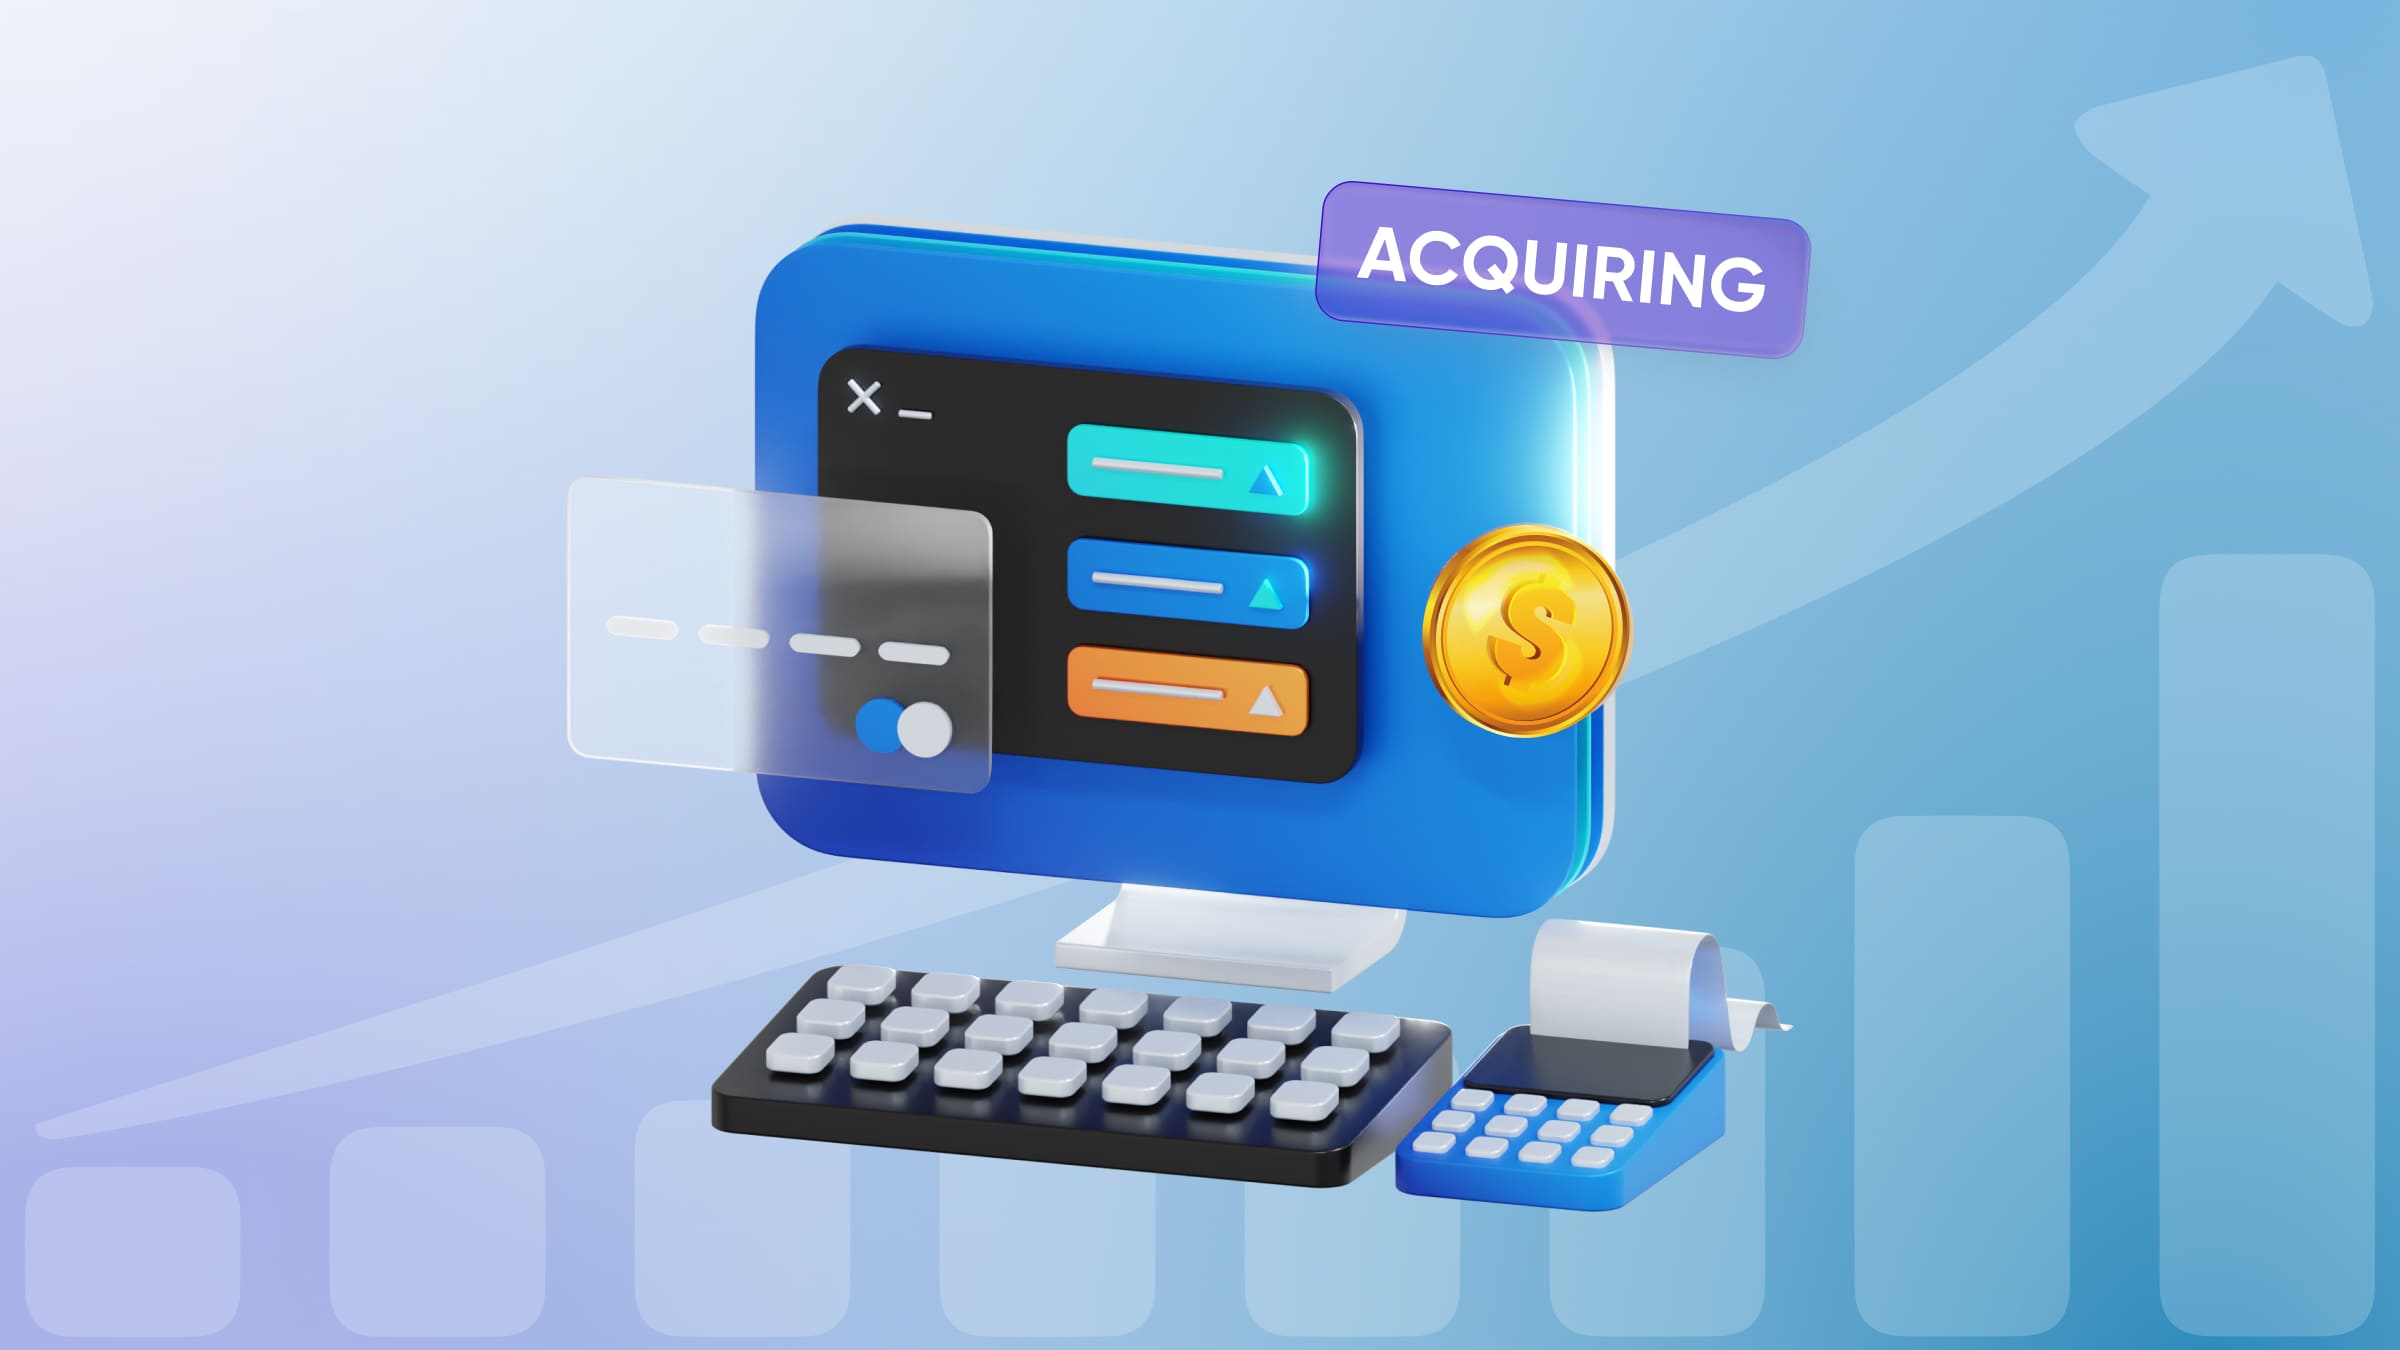 Among the advantages of Internet acquiring are convenience and round-the-clock payment processing.